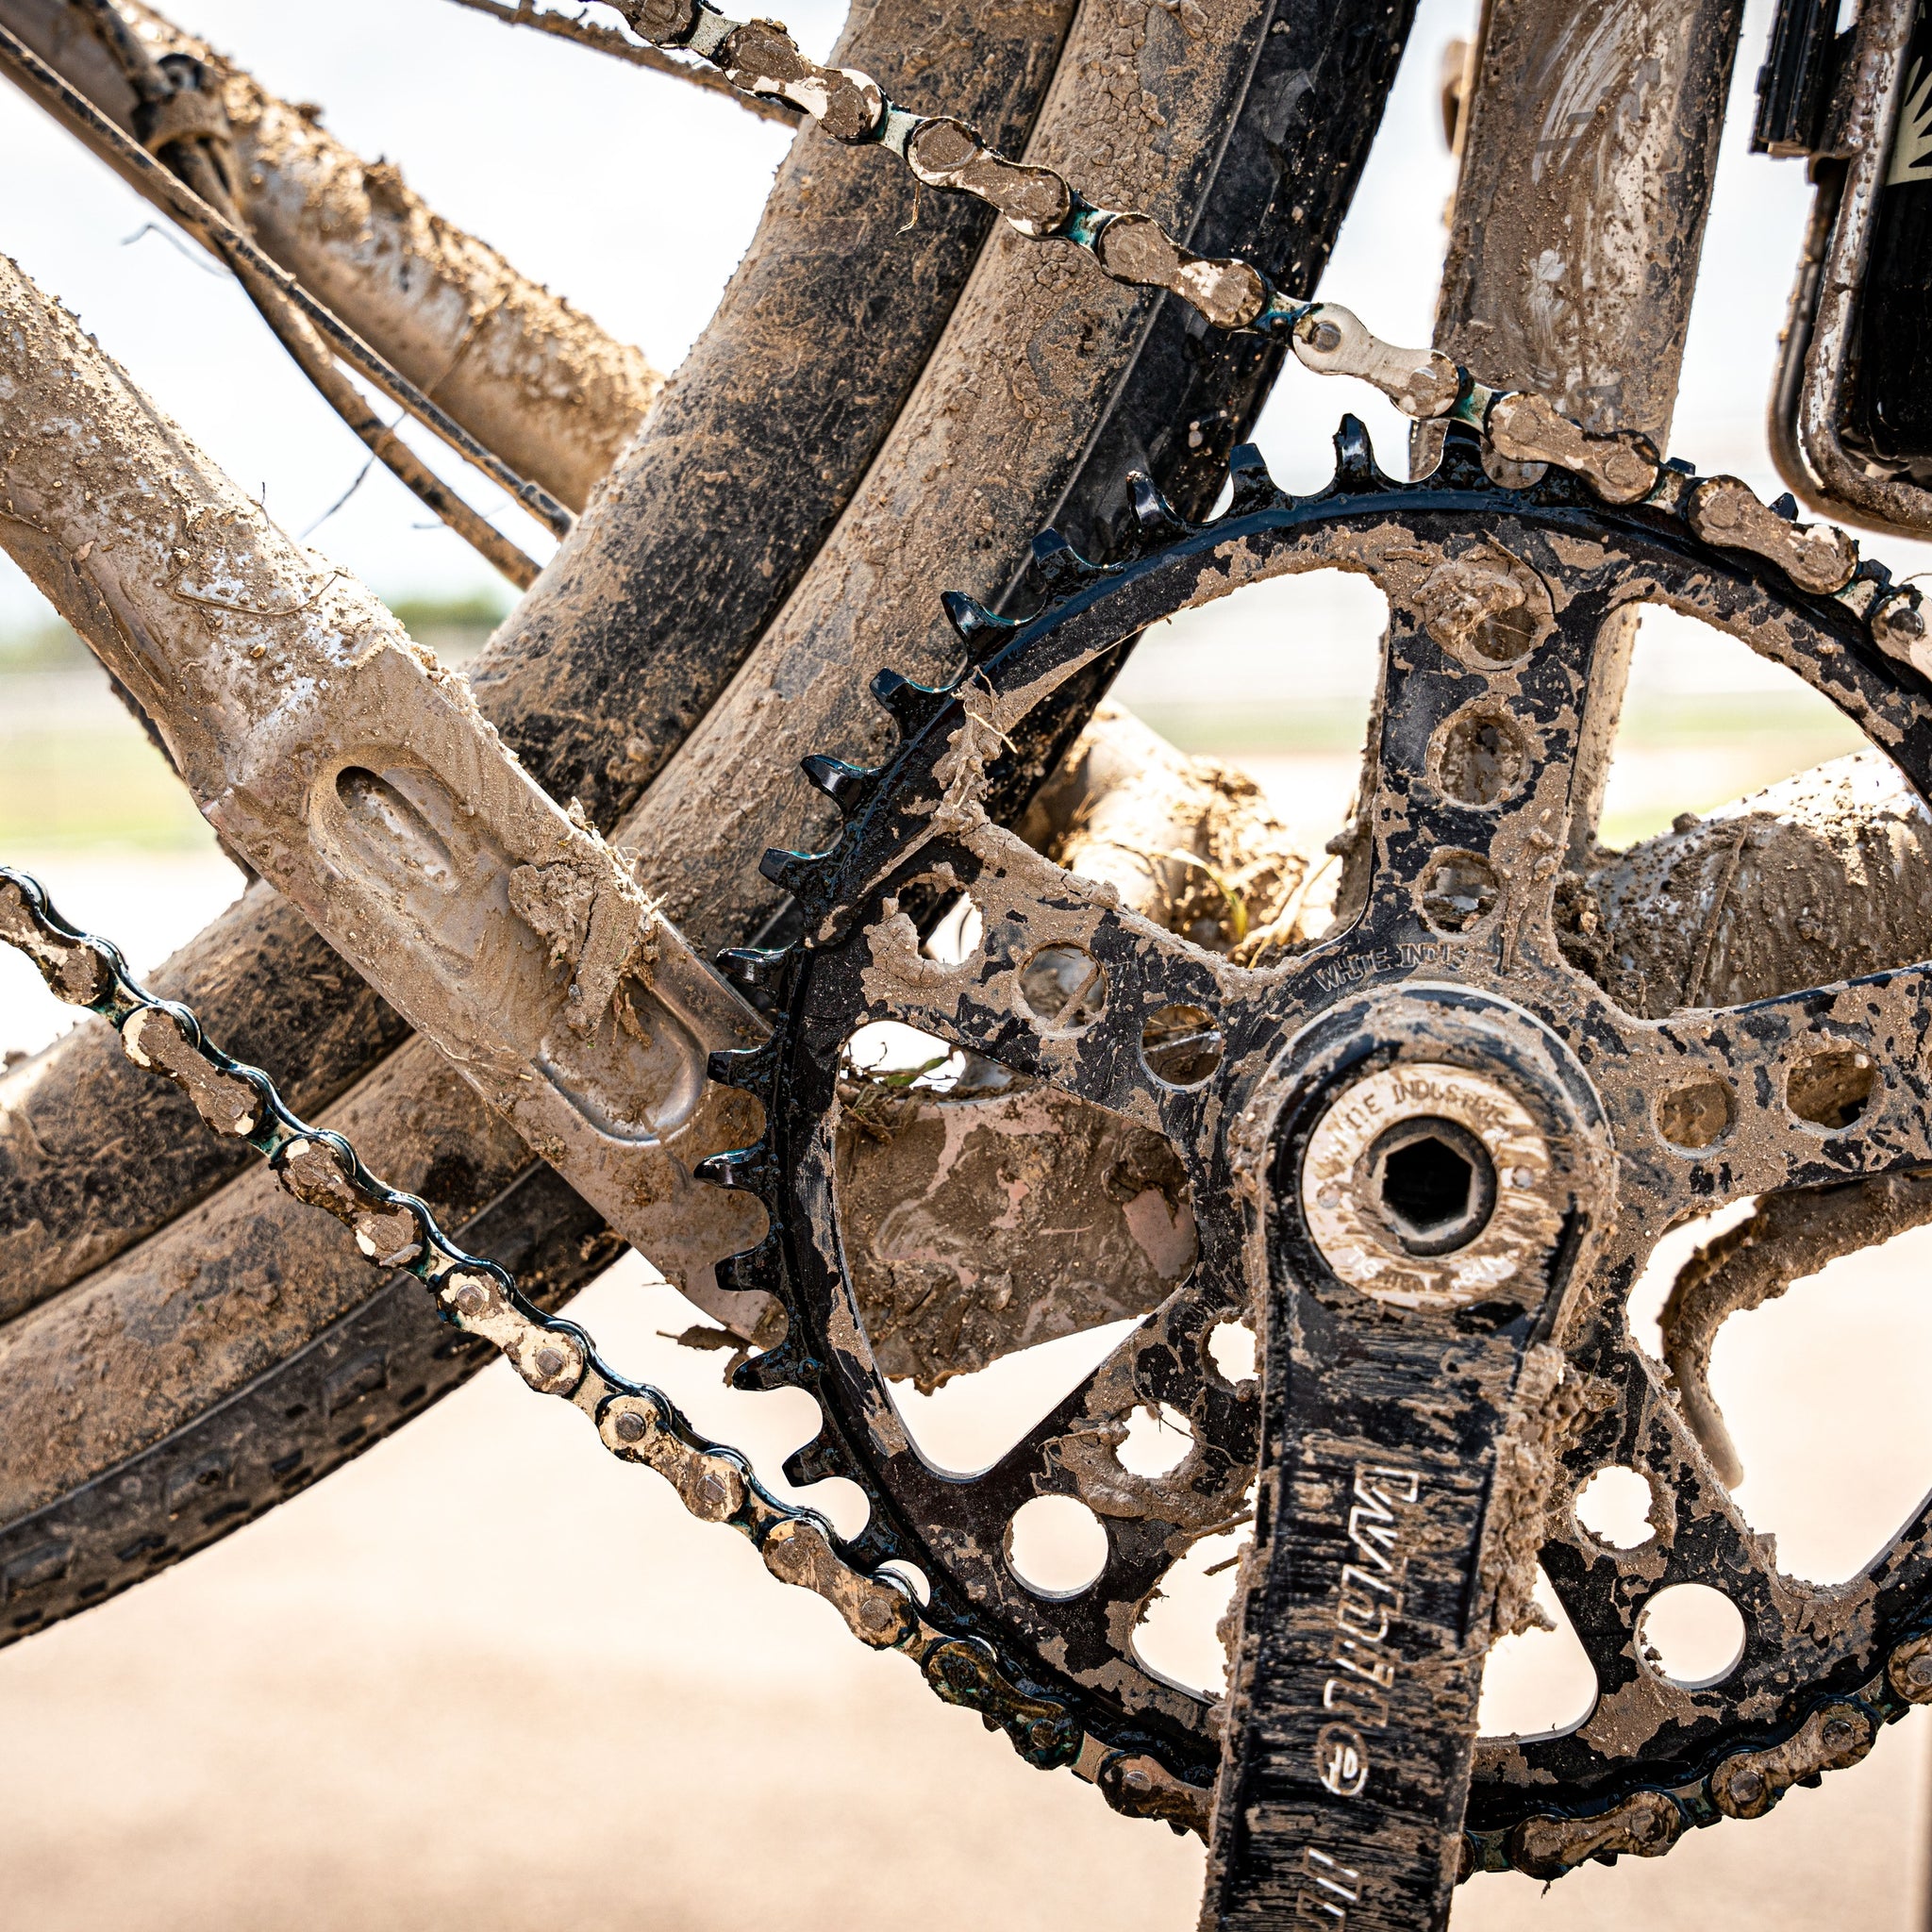 Waxing Your Chain vs. Using Wet Lube for Dust, Mud, & Unbound Gravel